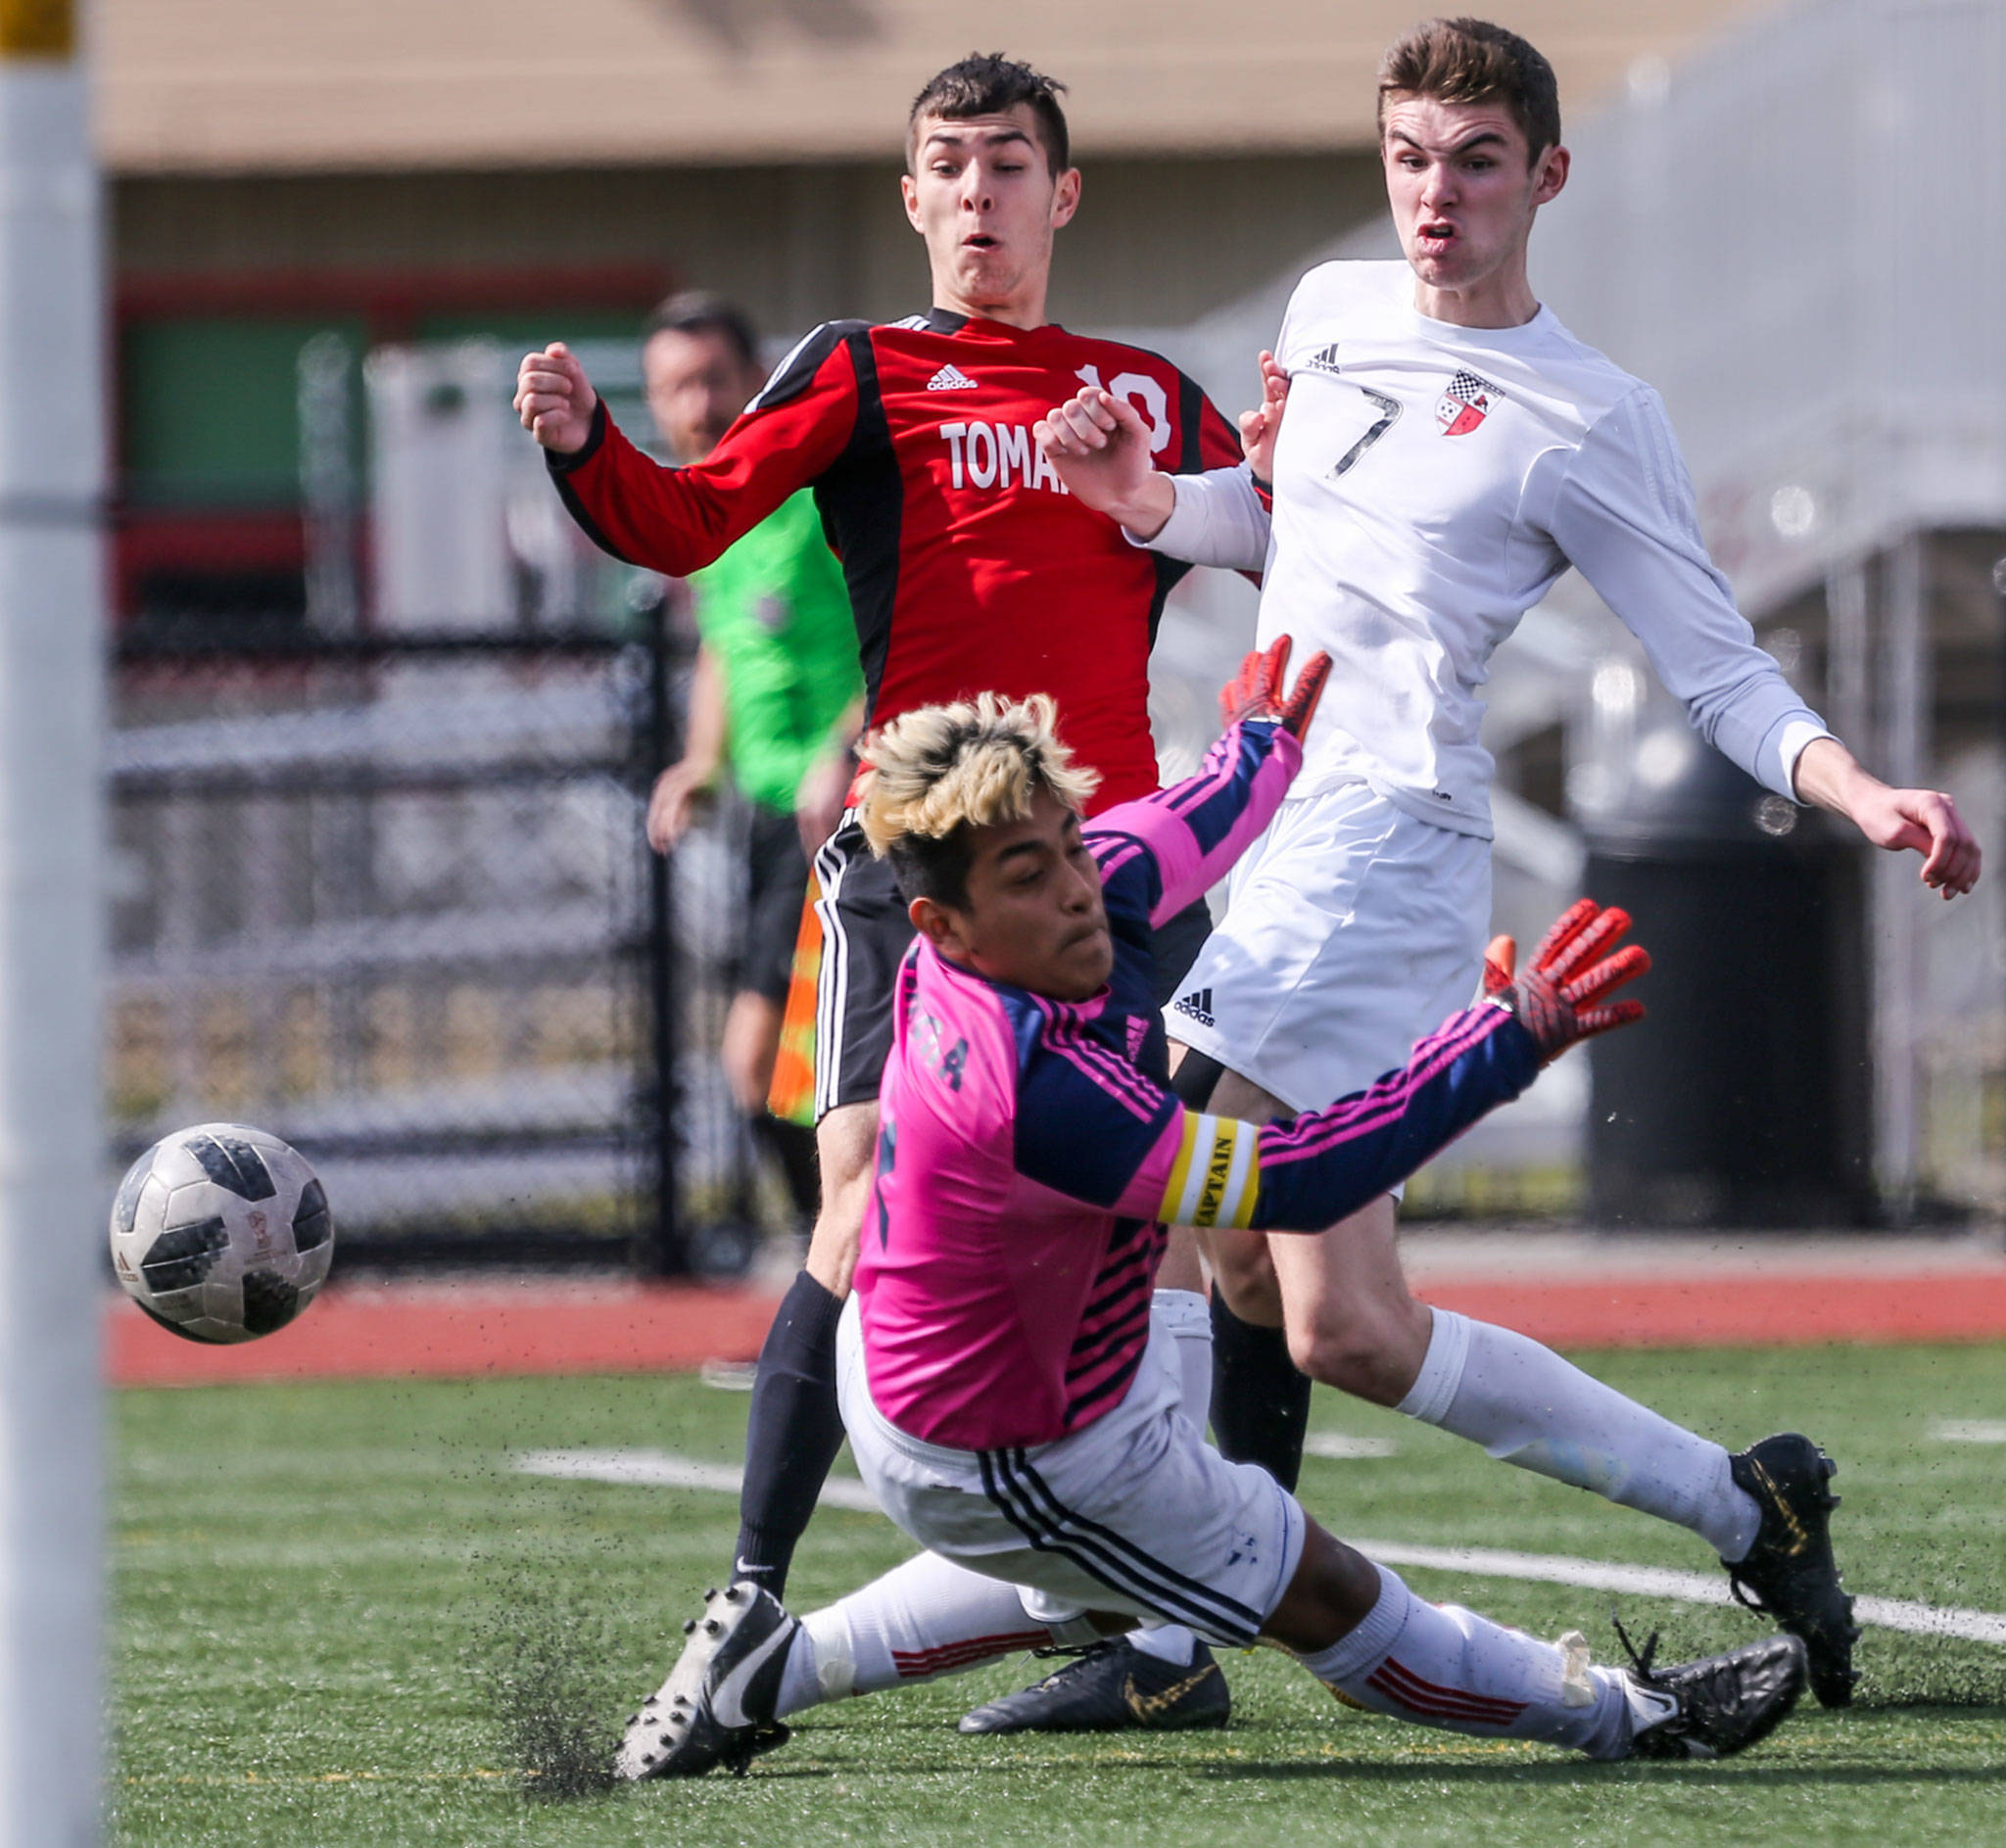 Marysville Pilchuck’s Kyle Matson (left) charges the net with Snohomish goalkeeper Michael Herrera (bottom) and Adam Kowalchyk defending during the teams’ Wesco 3A/2A showdown Saturday at Quil Ceda Stadium in Marysville. The match ended in a 1-1 draw. (Kevin Clark / The Herald)